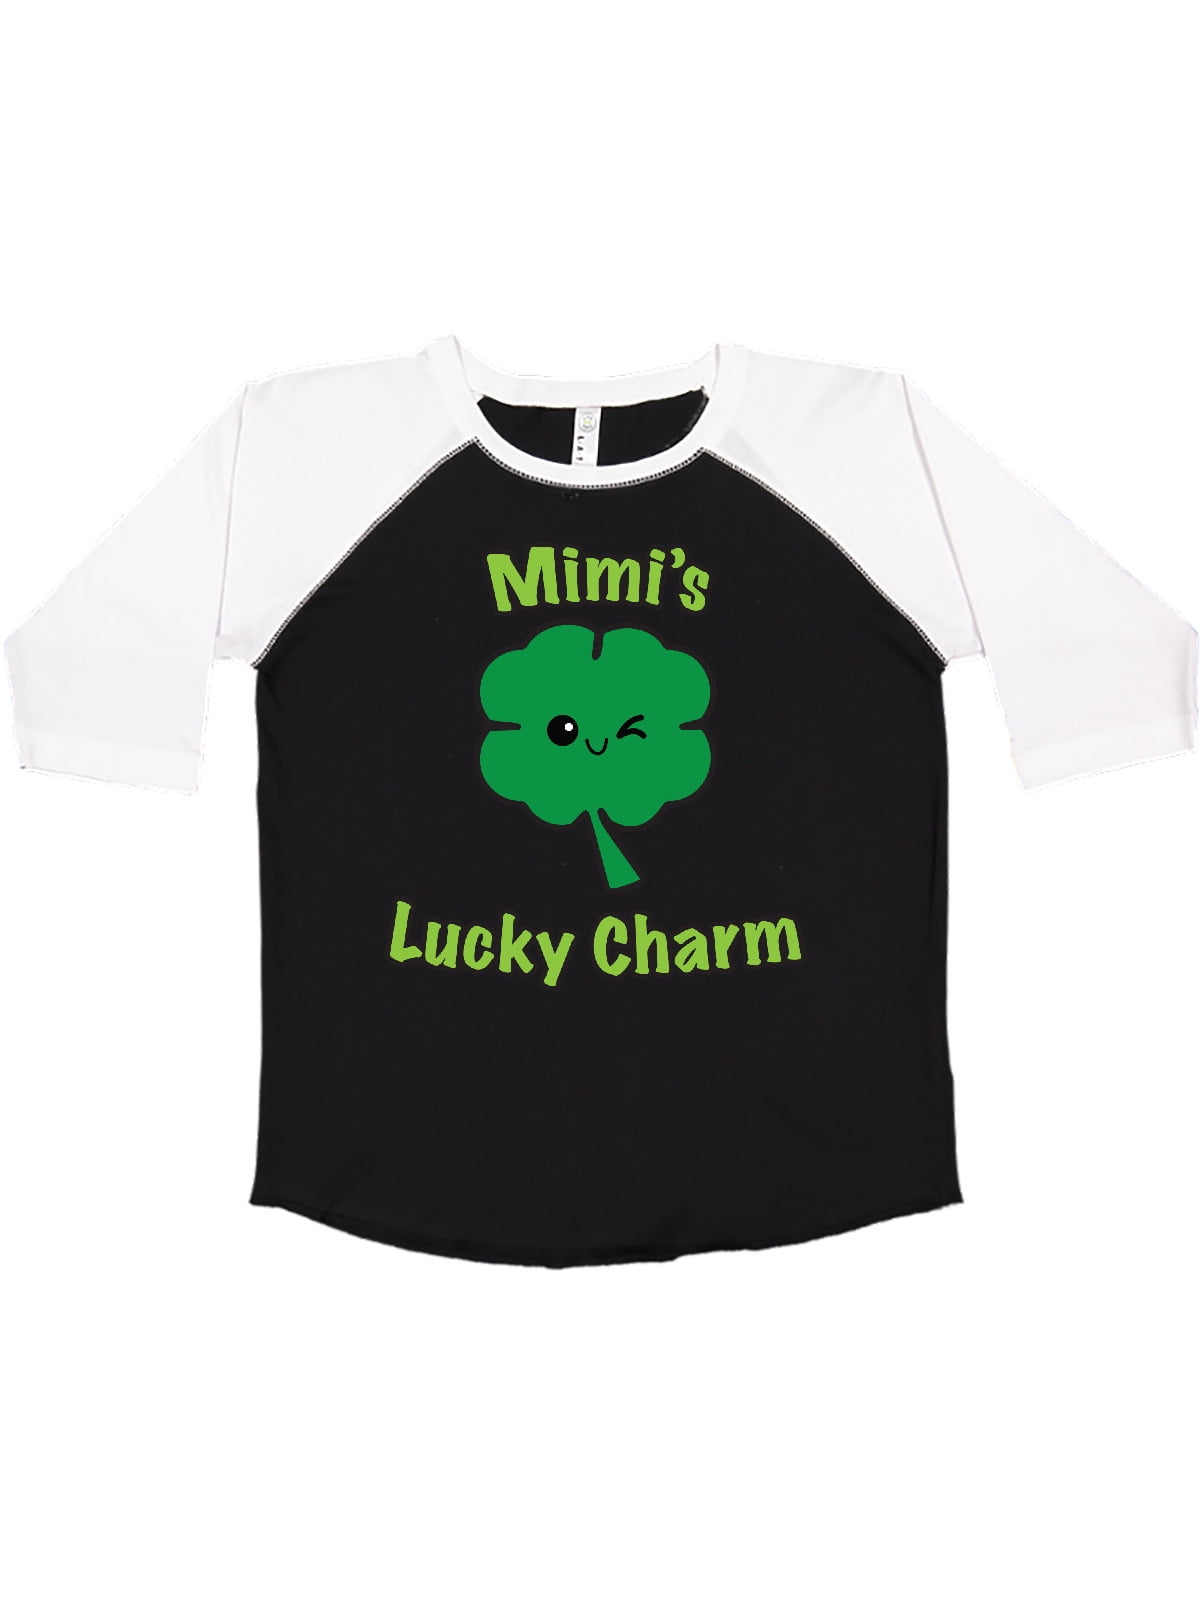 Unisex Good Luck Charm Shirt Youth/Toddler